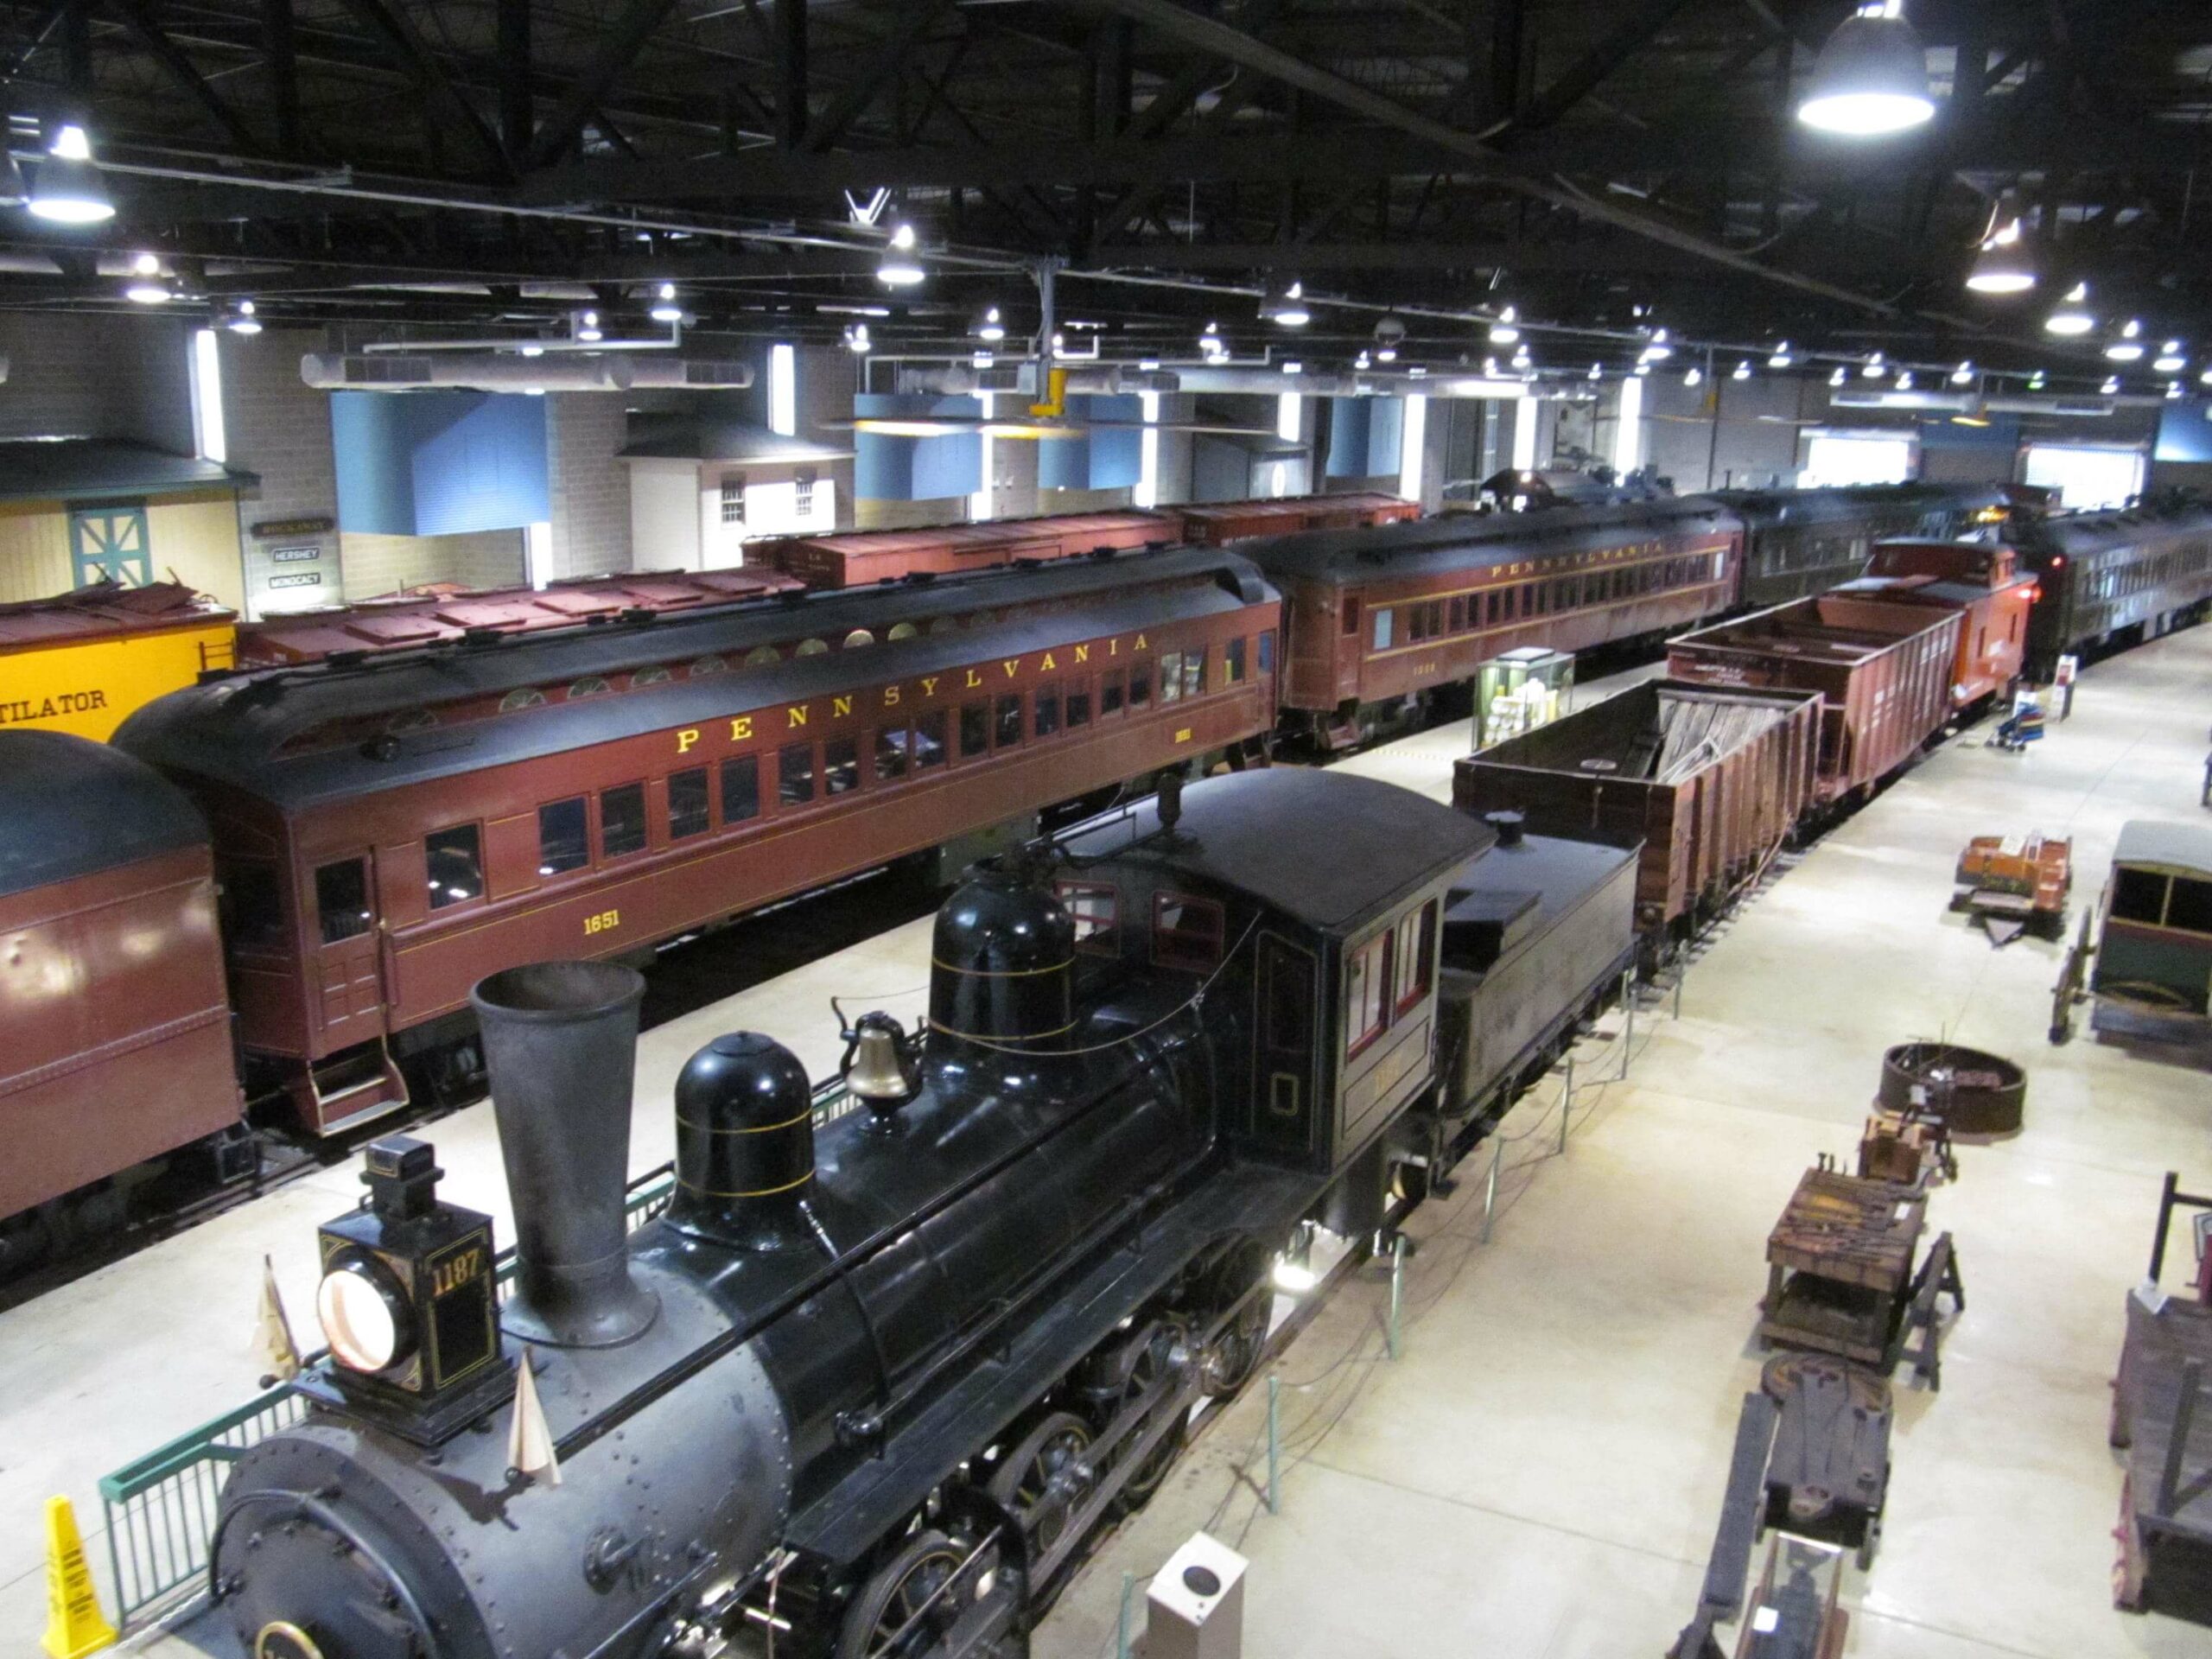 The Railroad Museum of Pennsylvania in Lancaster County